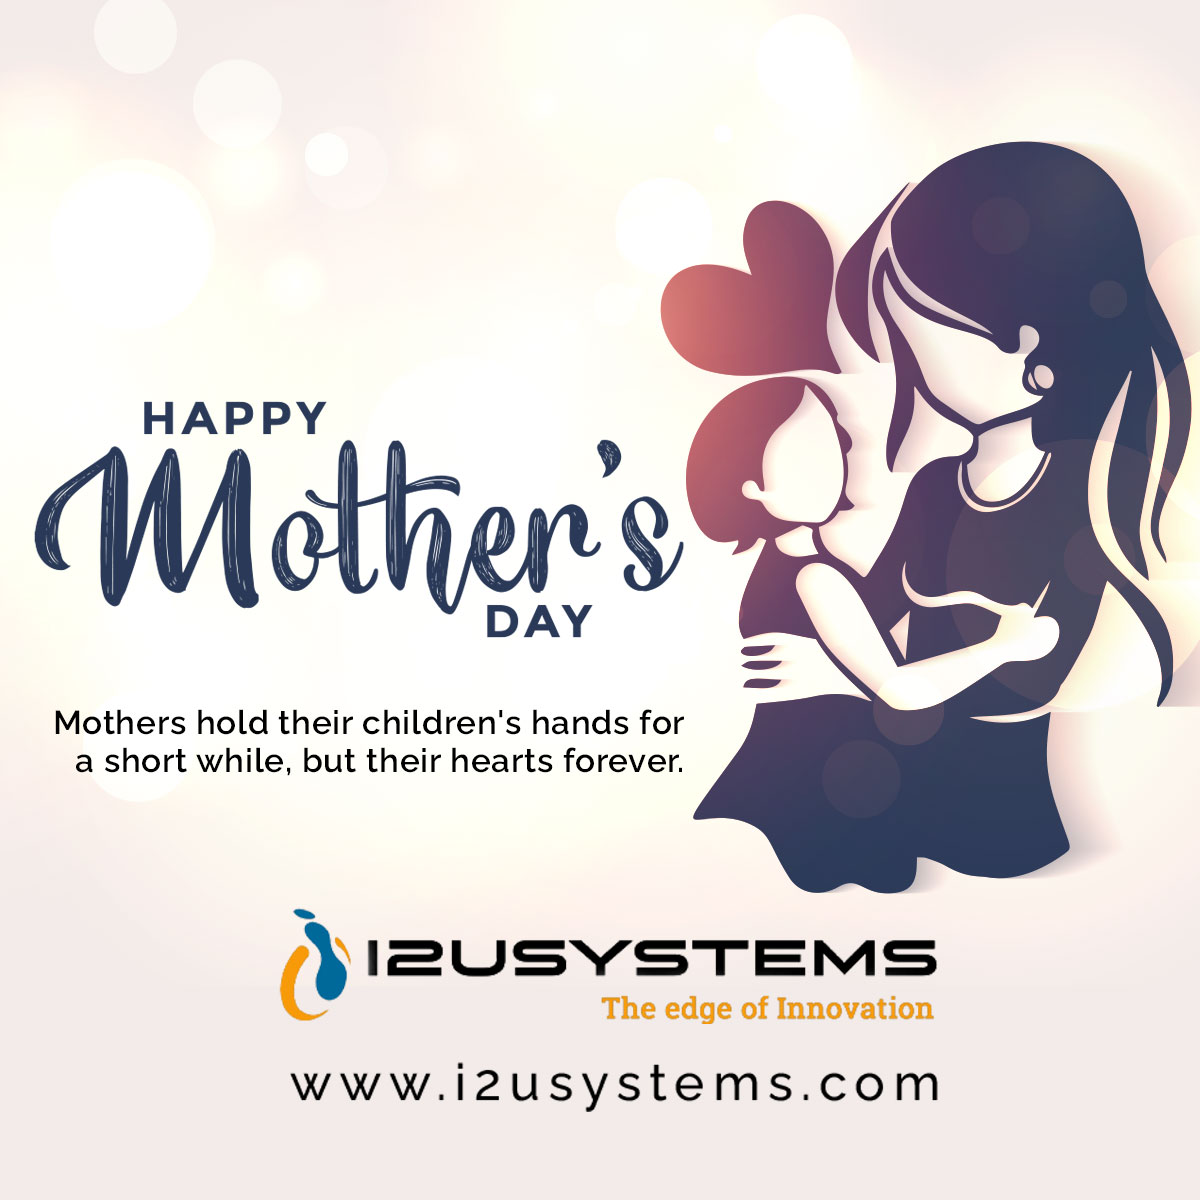 Happy Mother's Day..! Mothers hold their children's hands for a short while, but their hearts forever. #i2usystems #c2crequirements #w2jobs #directclient #directclients #i2u #i2usystemsinc #usaitjobs #communications #mothersday #mothersday2024 #peace #love #purelove #children